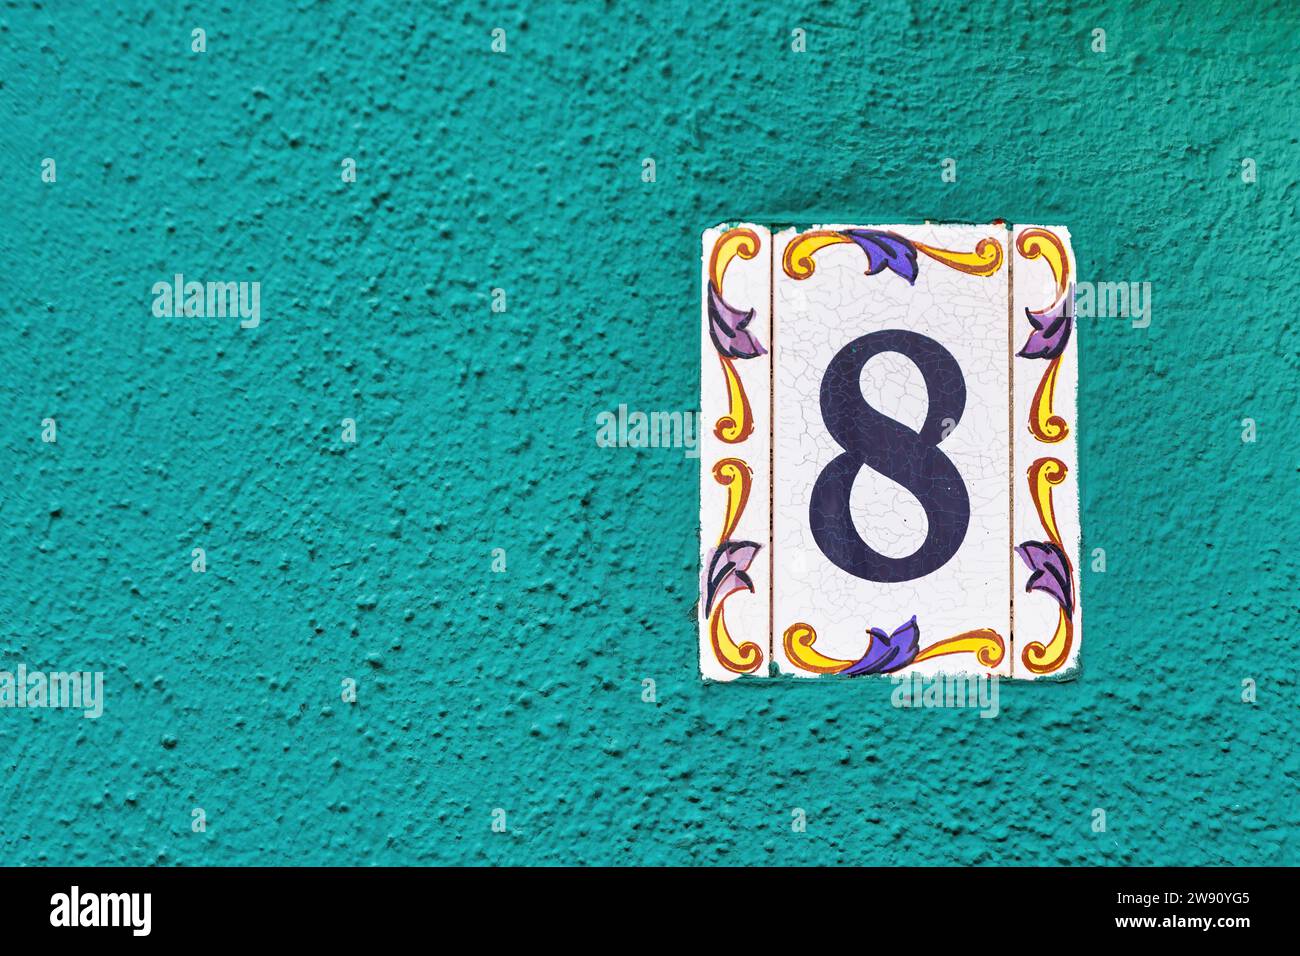 House Number 8: Address Marker on House Wall Stock Photo